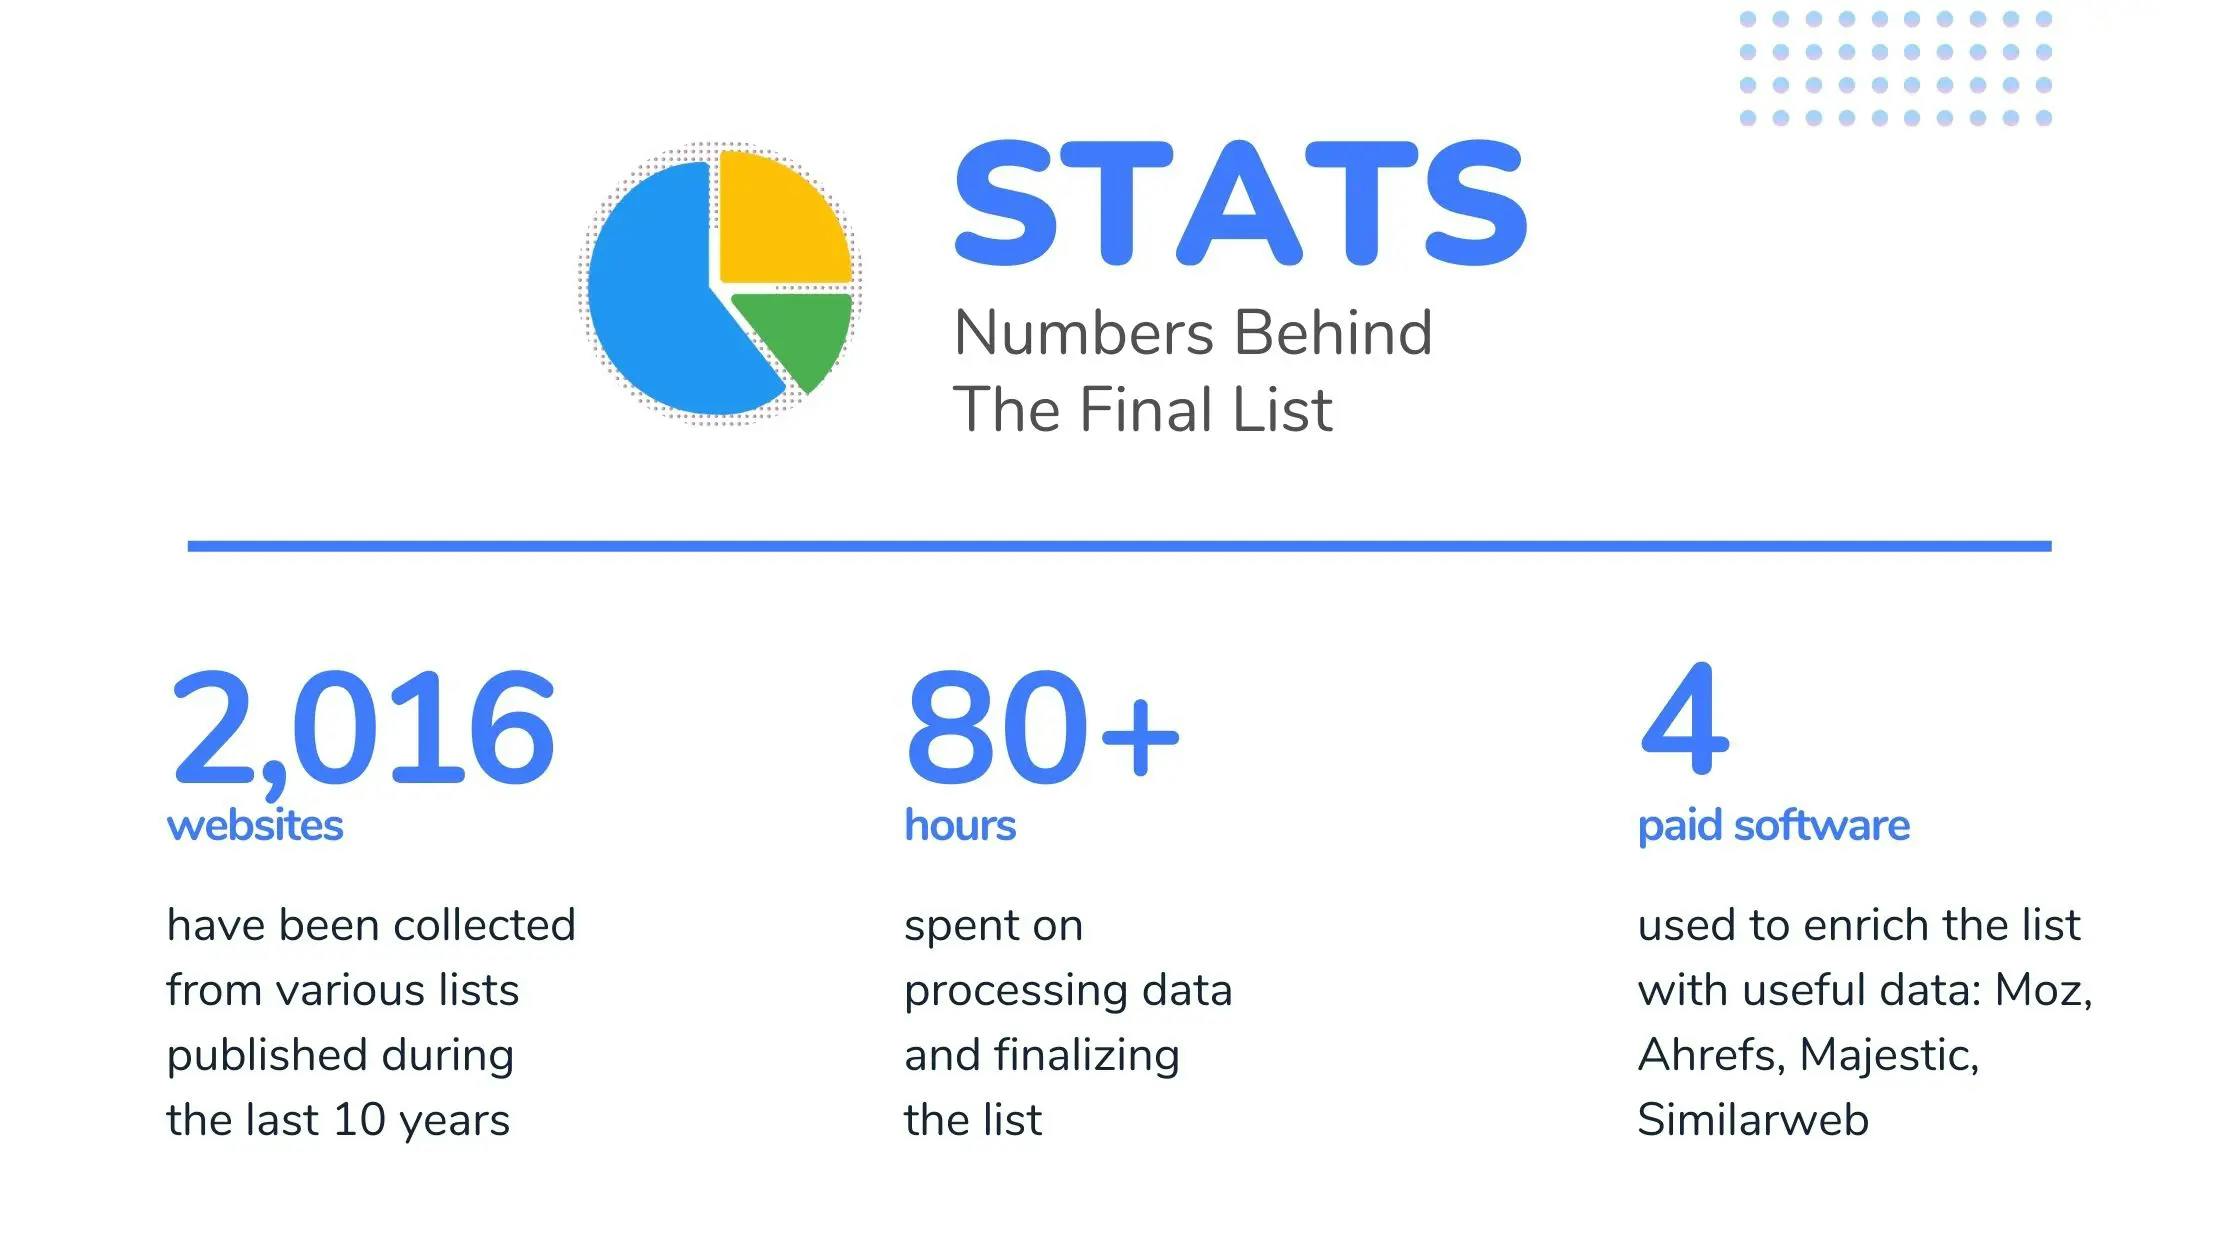 List numbers: 2016 collected websites, 80+ hours processing data, 4 paid software used